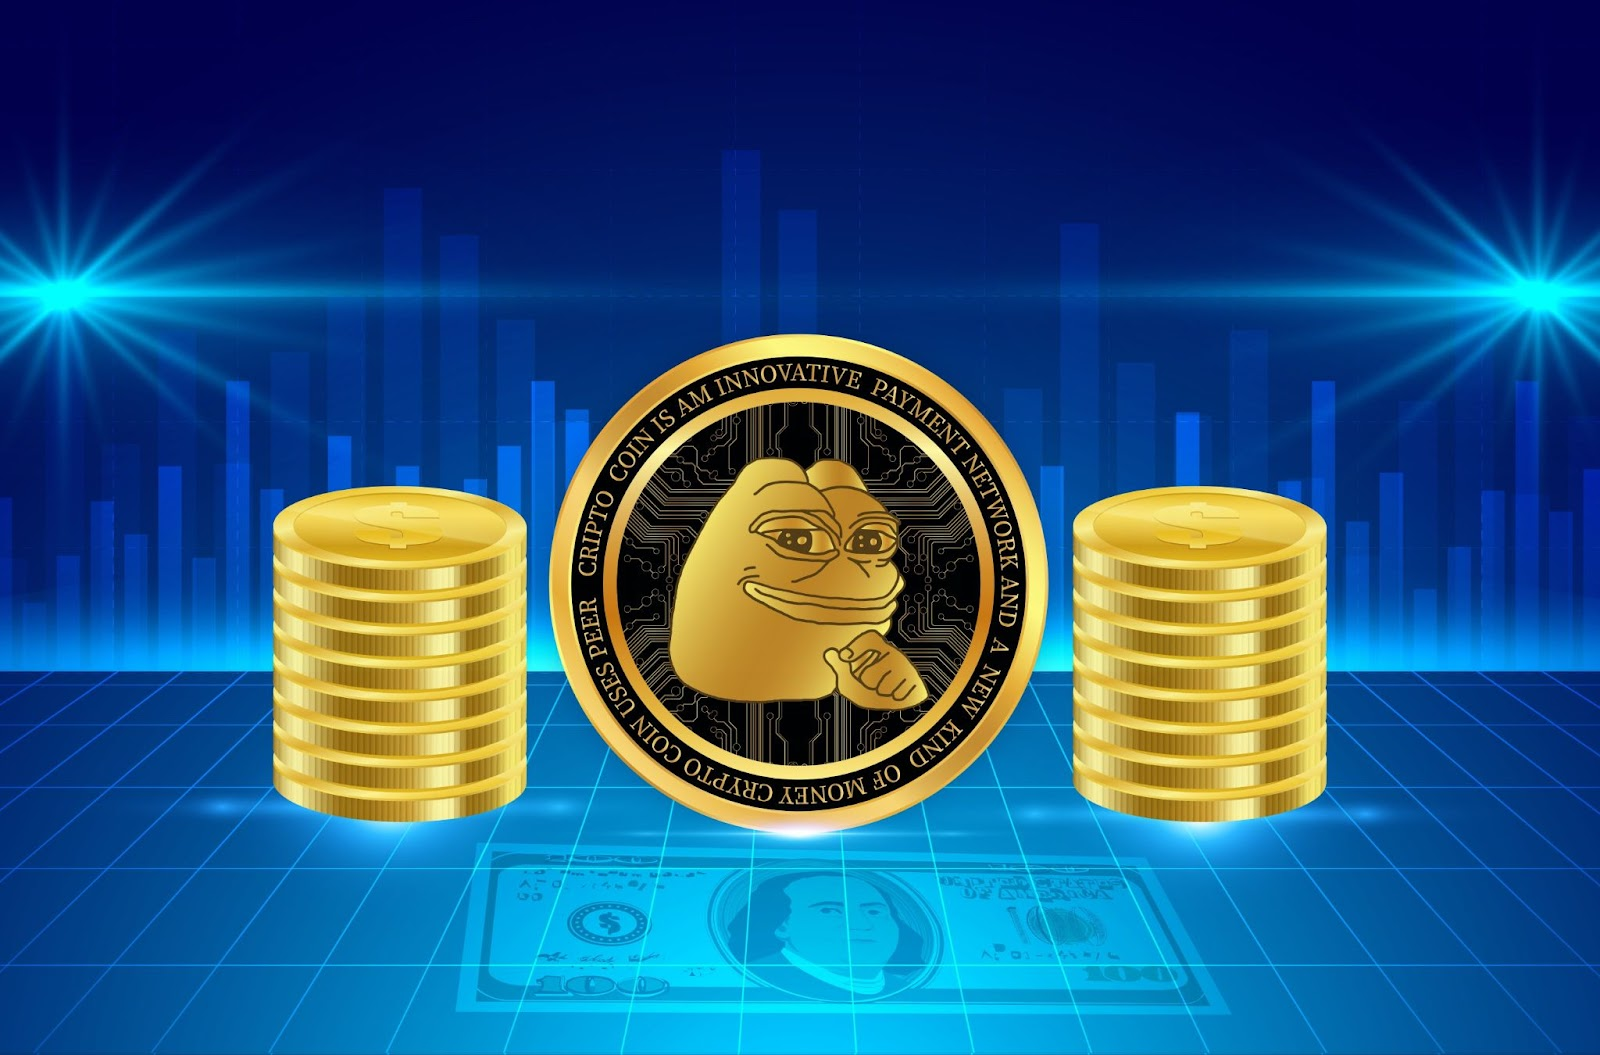 Milei Moneda Presale Beckons With Promising Potential Amid Continued Gains On PEPE And SHIB